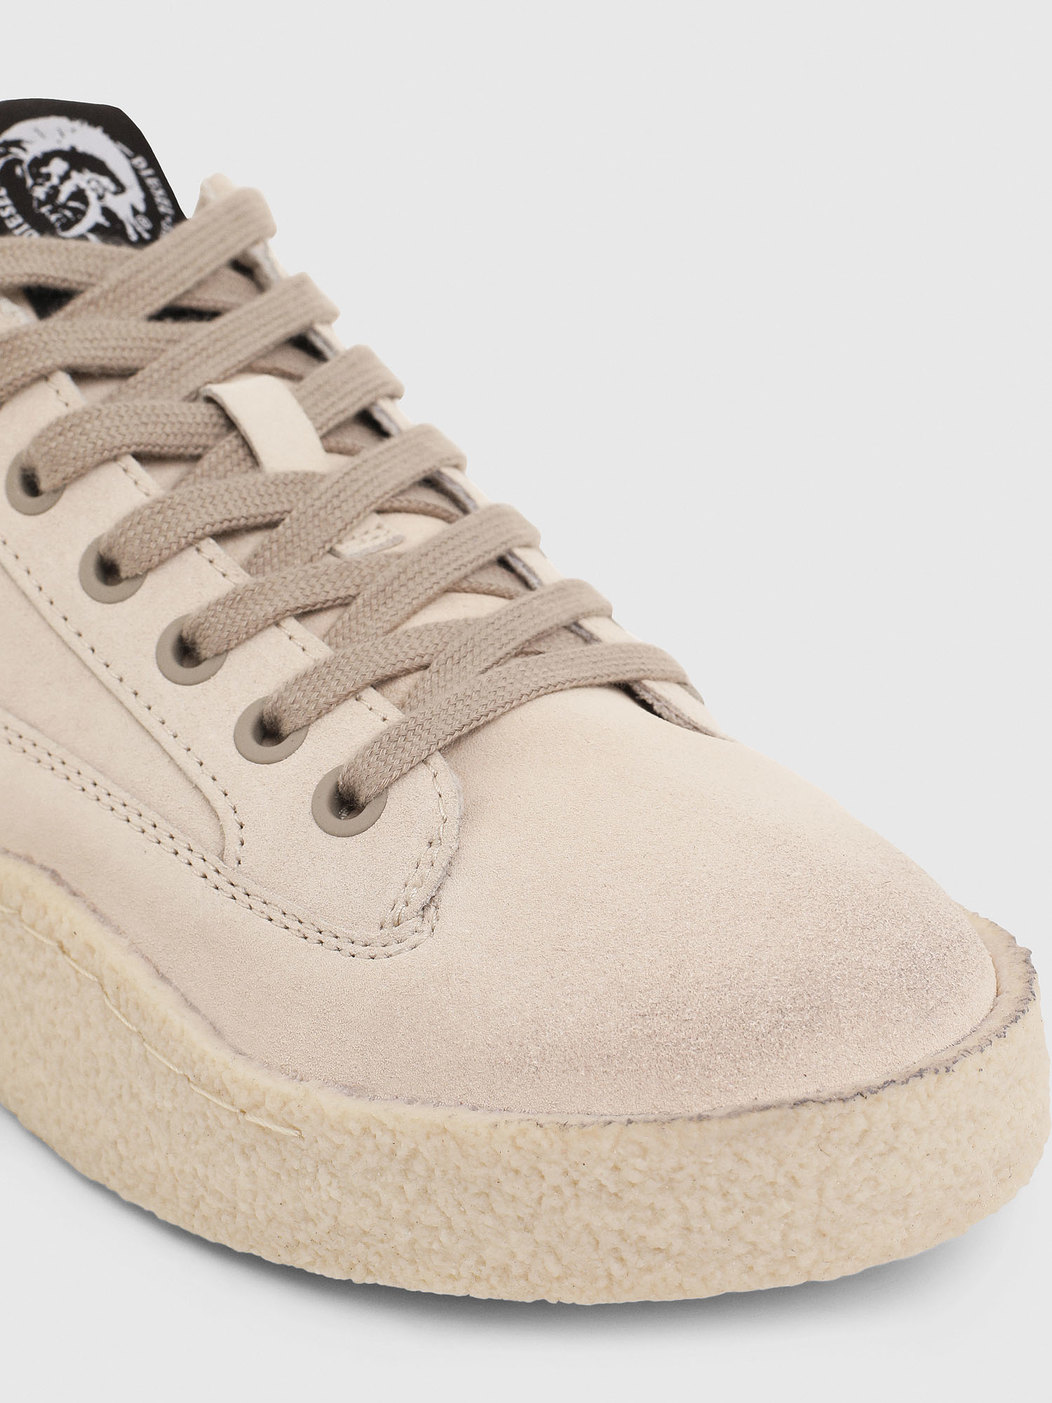 Low-Top Sneakers In Treated Suede